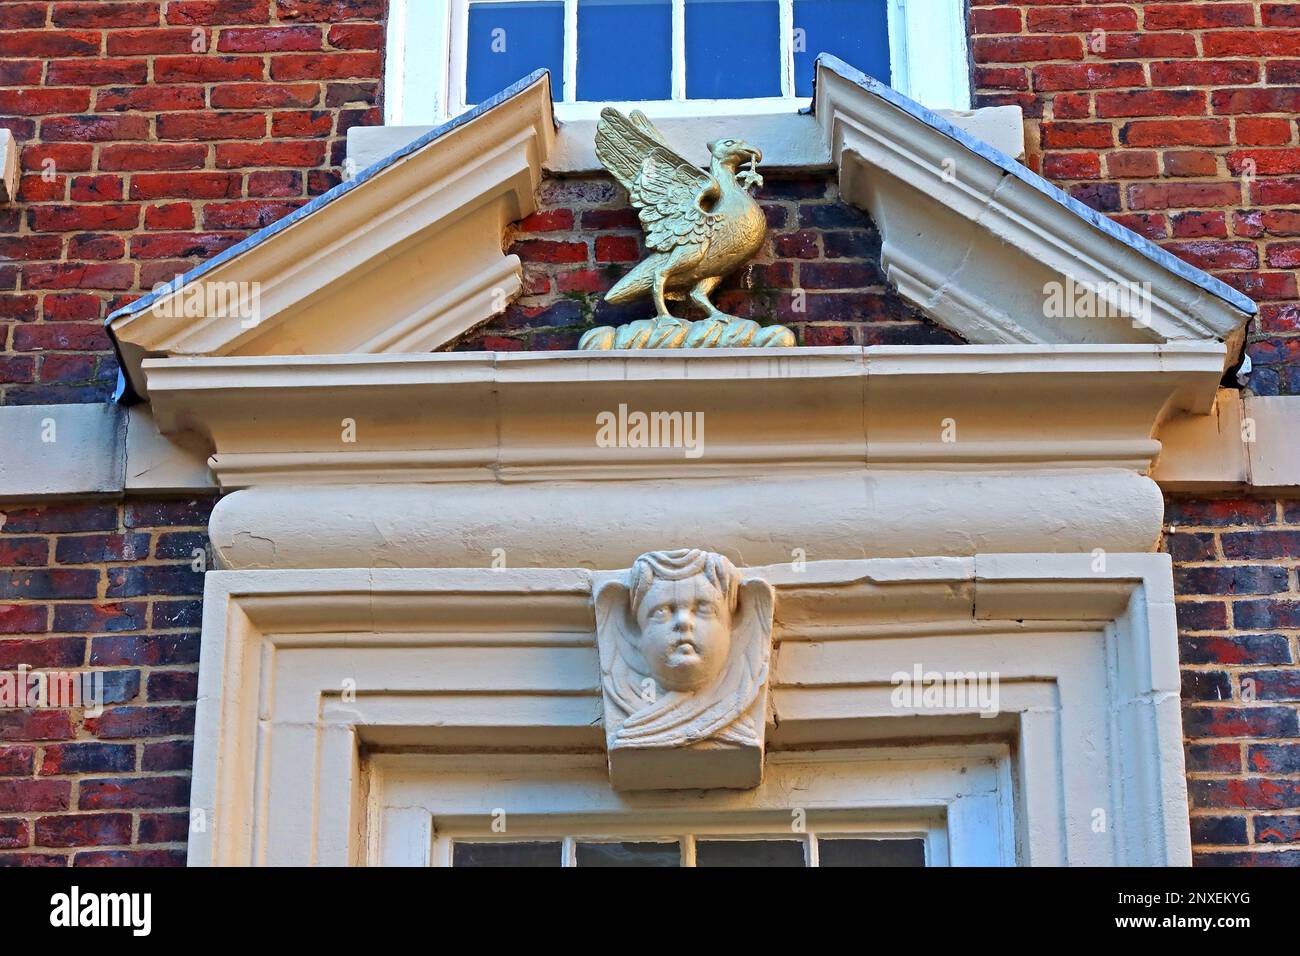 Doorway Liver Bird at The Bluecoat Chambers, built 1716–17 as a charity school, 8 School Lane, Liverpool, Merseyside, England, L1 3BX Stock Photo